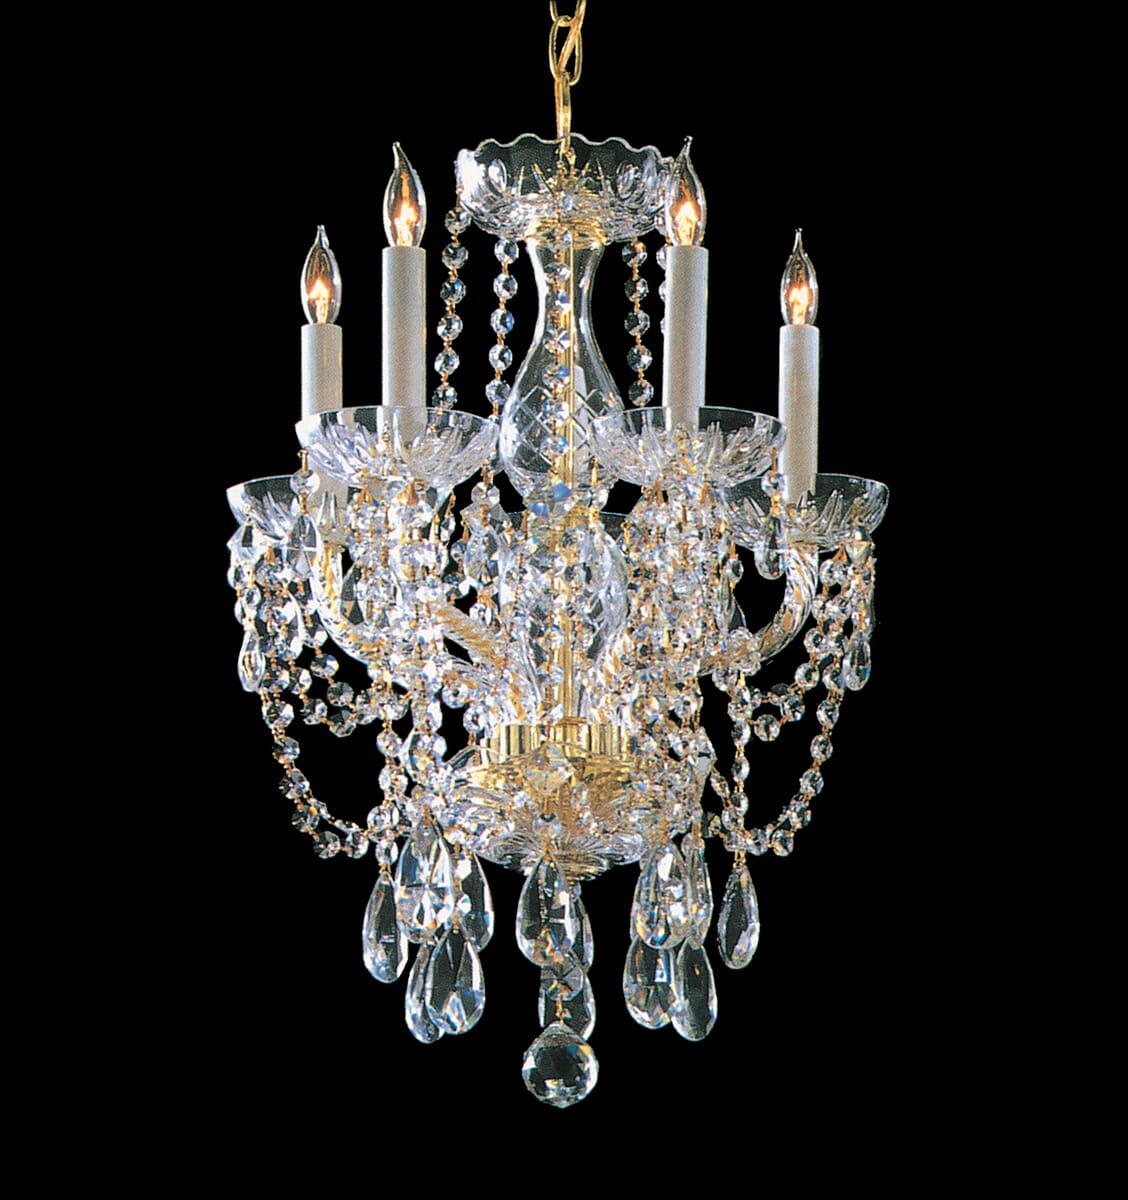 Traditional Crystal 5-Light 20"" Mini Chandelier in Polished Brass with Clear Spectra Crystals -  Crystorama, 1129-PB-CL-SAQ